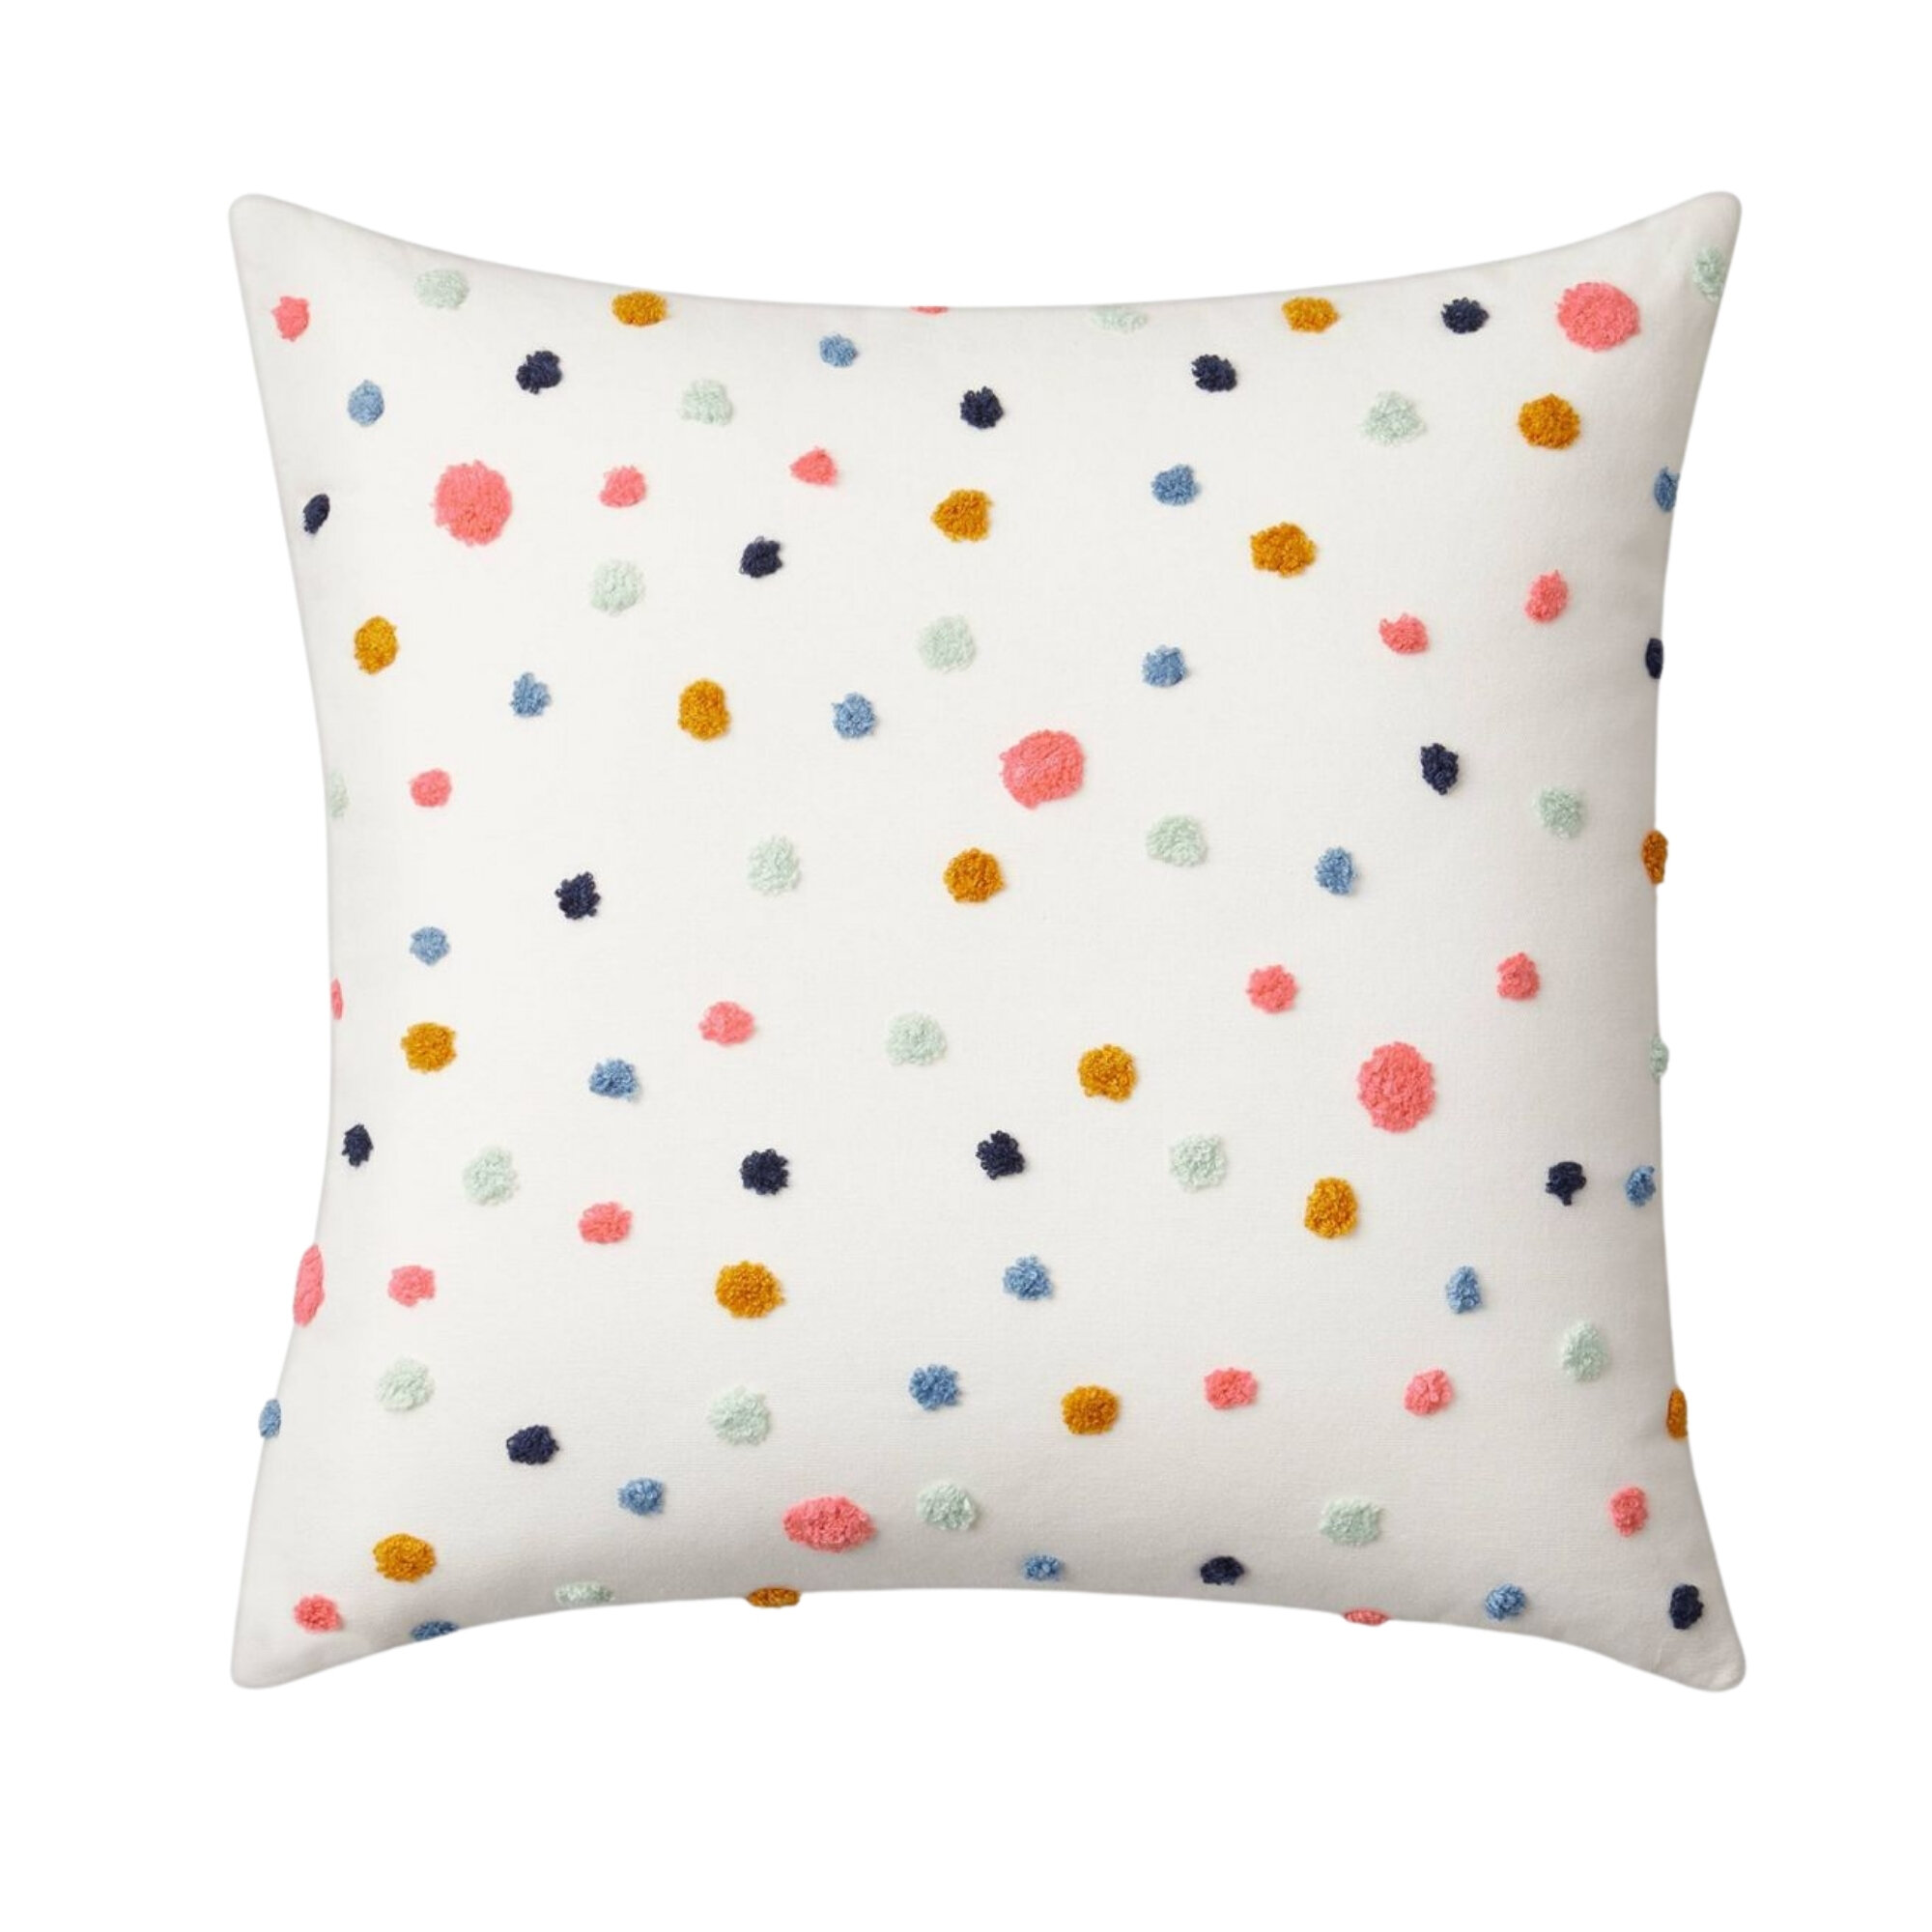 Embroidered Dot Pillow, $15